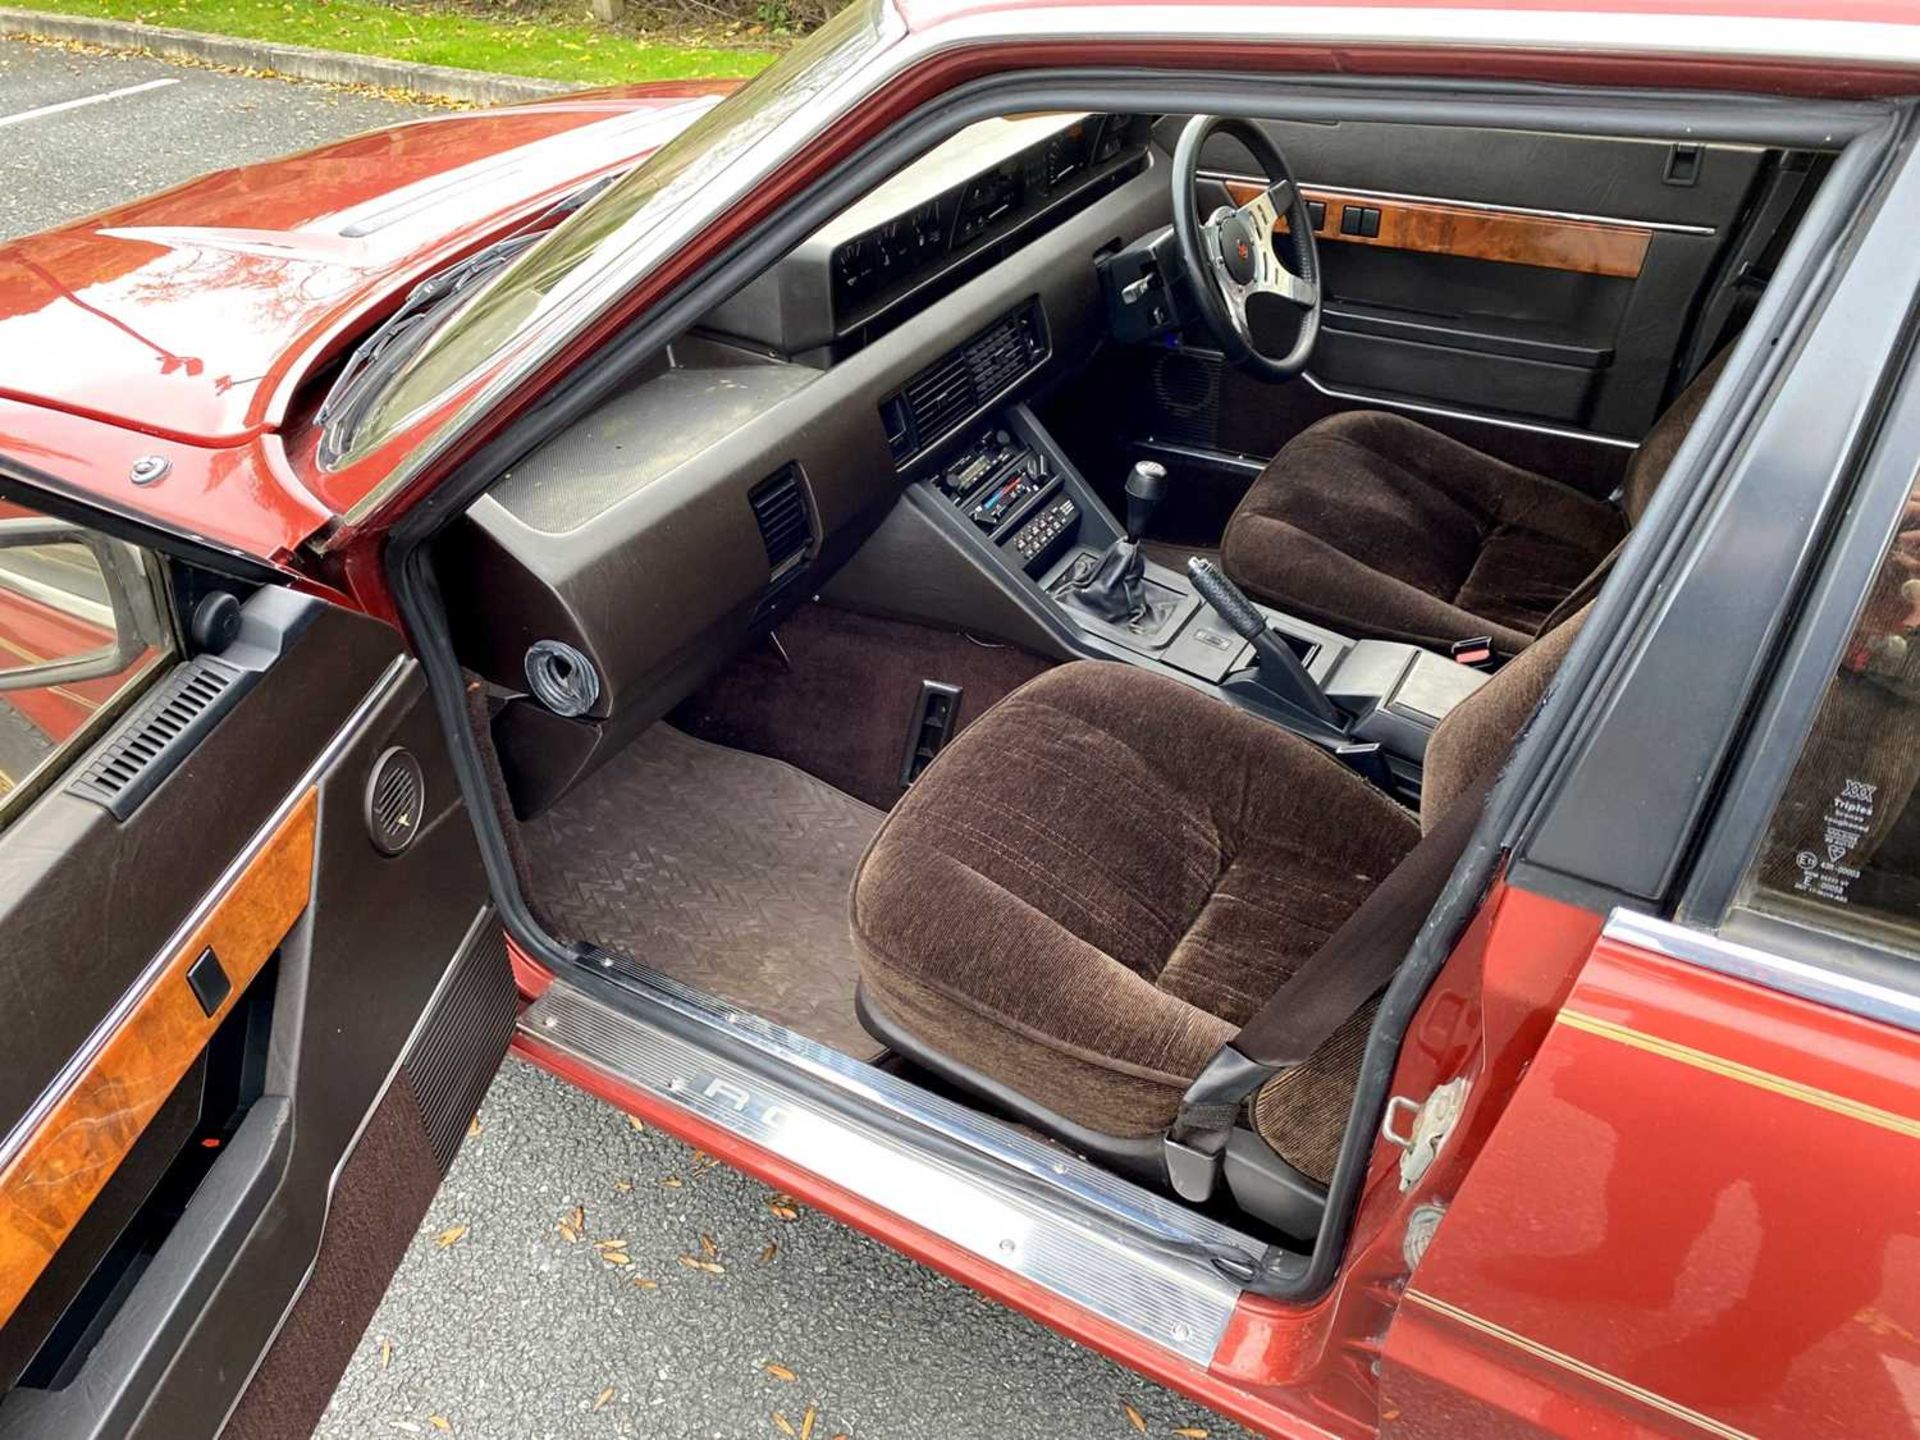 1982 Rover SD1 3500 SE Only 29,000 miles - Image 27 of 100